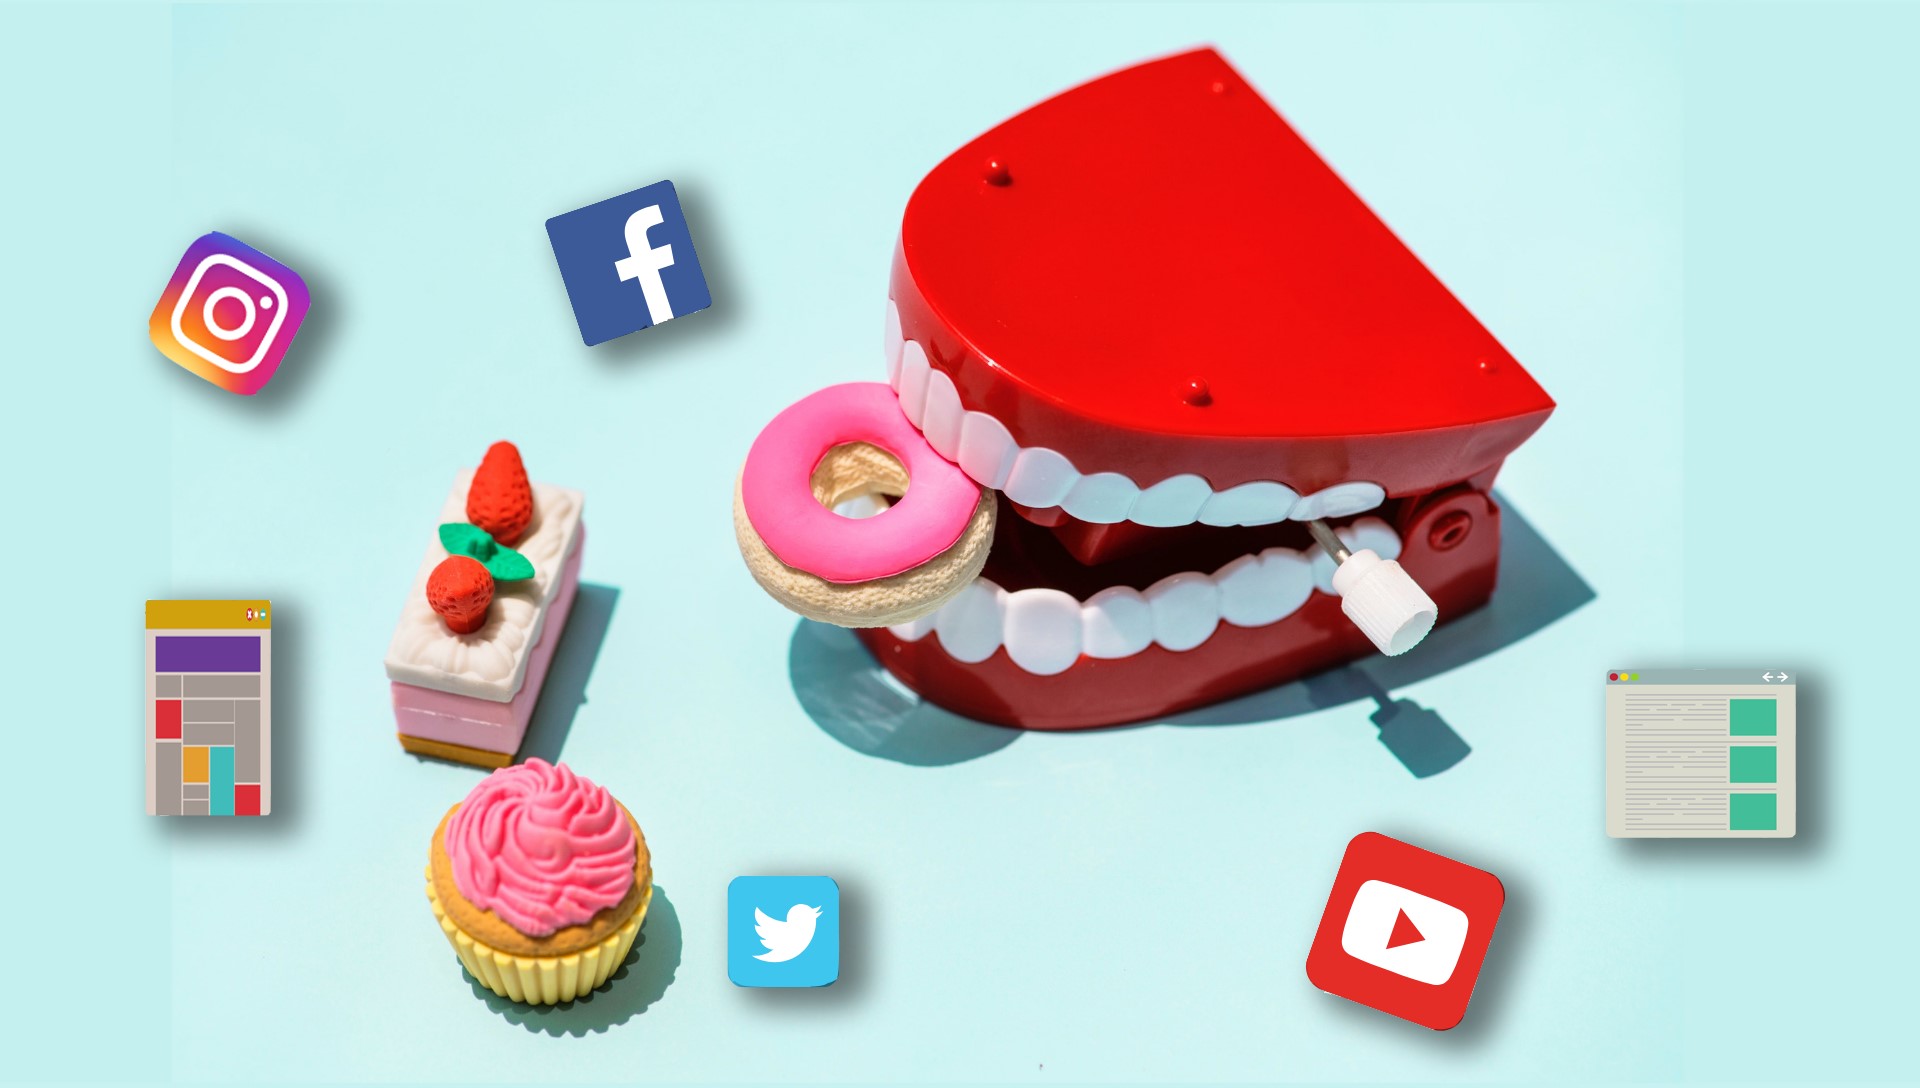 Image depicting how content marketing firms create snackable content for social media platforms